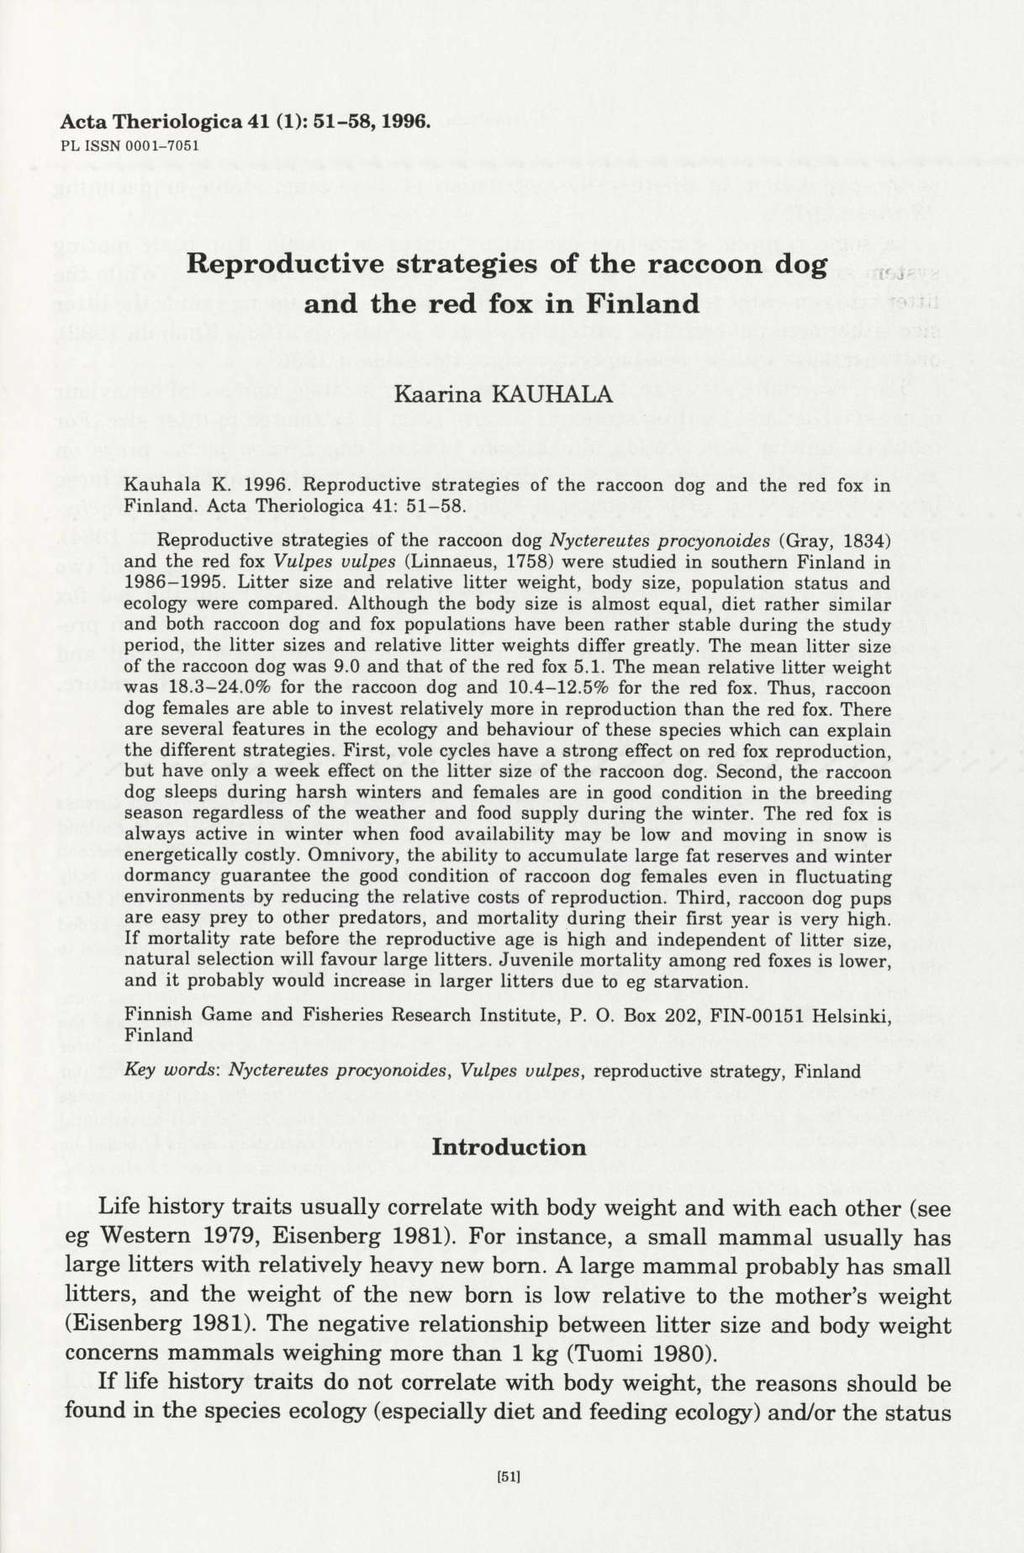 Acta Theriologica 41 (1): 51-58,1996. PL ISSN 0001-7051 Reproductive strategies of the raccoon dog and the red fox in Finland Kaarina KAUHALA Kauhala K. 1996.